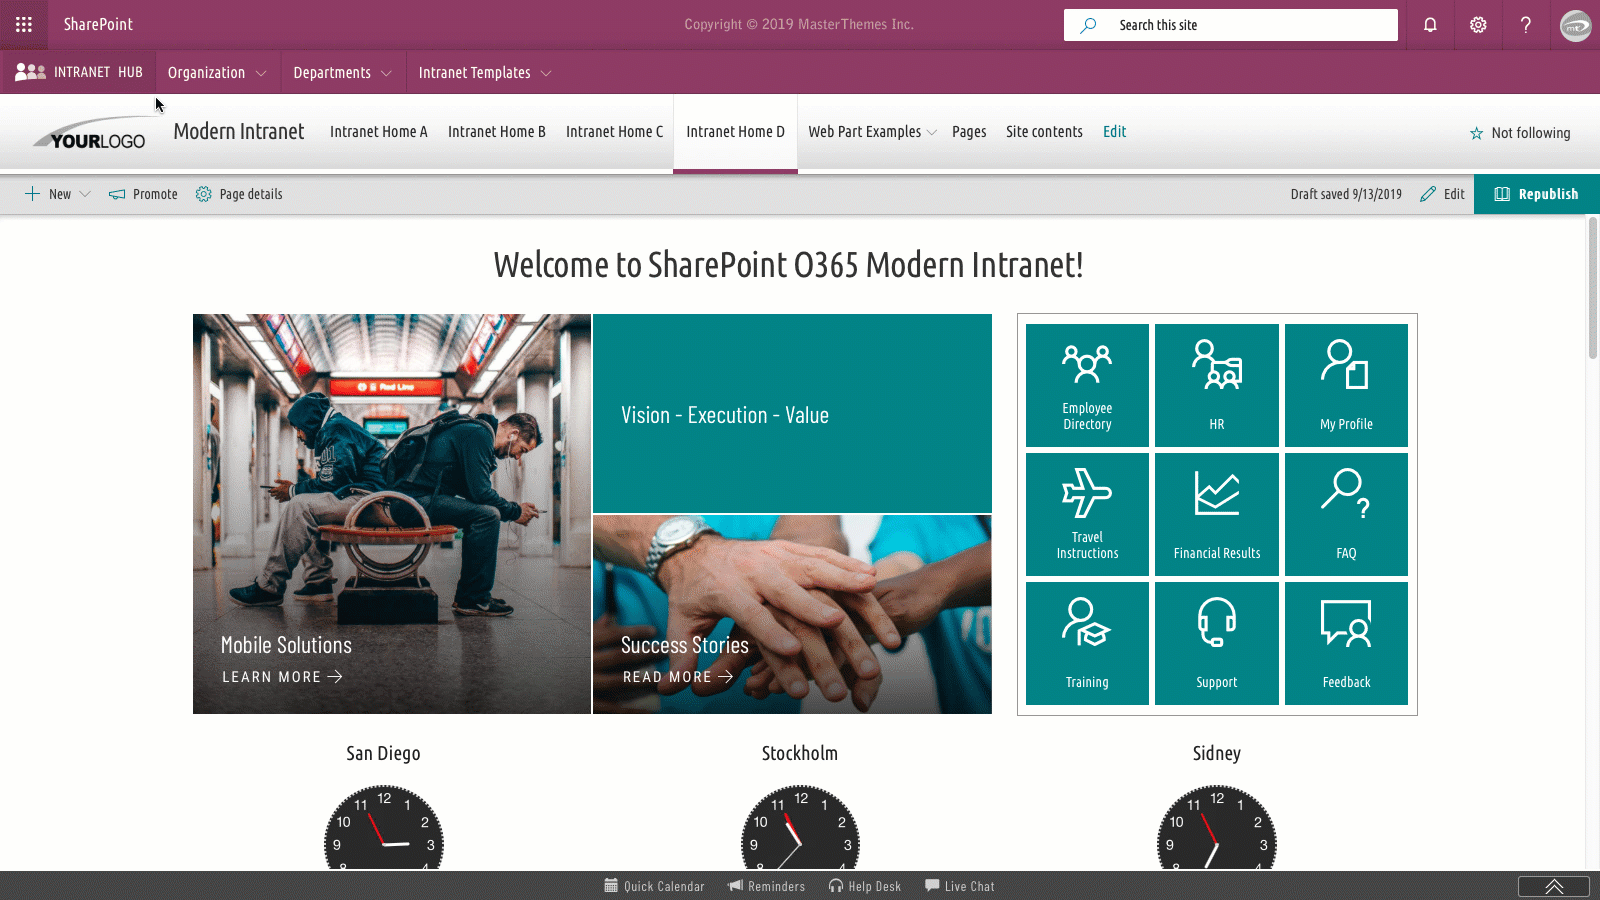 Take a tour of our theming solutions and templates for modern SharePoint Online, Office 365, and SharePoint On-Premises. Learn more about sharepoint, sharepoint online, modern sharepoint, sharepoint o365, sharepoint office365, intranet templates, sharepoint intranet templates, office365, sharepoint site designs, sharepoint templates, sharepoint themes, modern templates, communication templates, modern themes, SPFx templates, sharepoint 2019 themes, custom themes, templates, responsive themes, responsive design, theme, themes, custom themes, masterpage, masterpages, master pages, sharepoint layouts, and sharepoint branding.